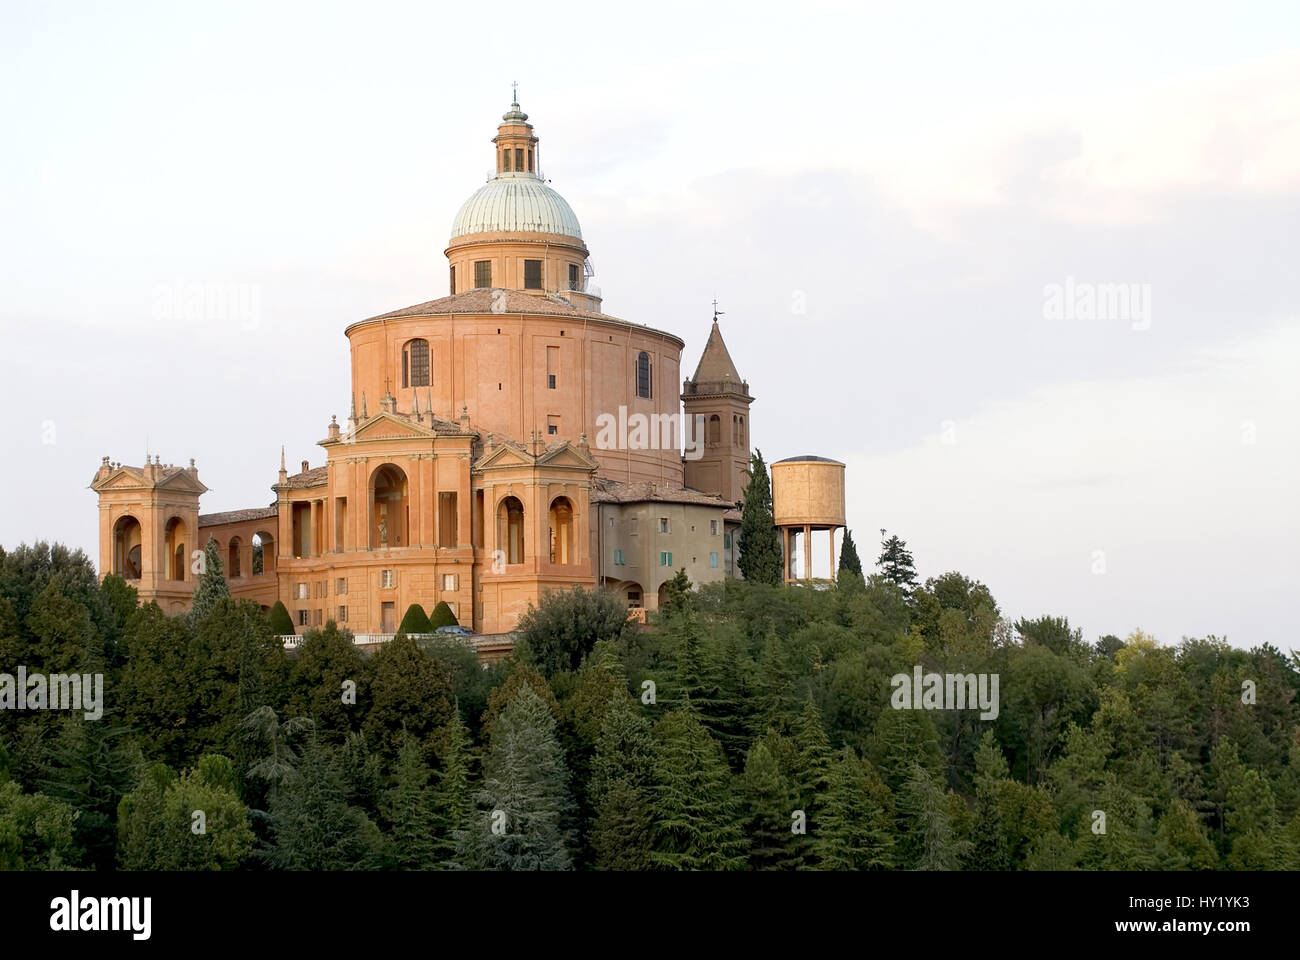 Image of the Sanctuary of the Madonna of San Luca, a basilica church in Bologna, central Italy, sited atop Colle or Monte della Guardia, in a forested Stock Photo